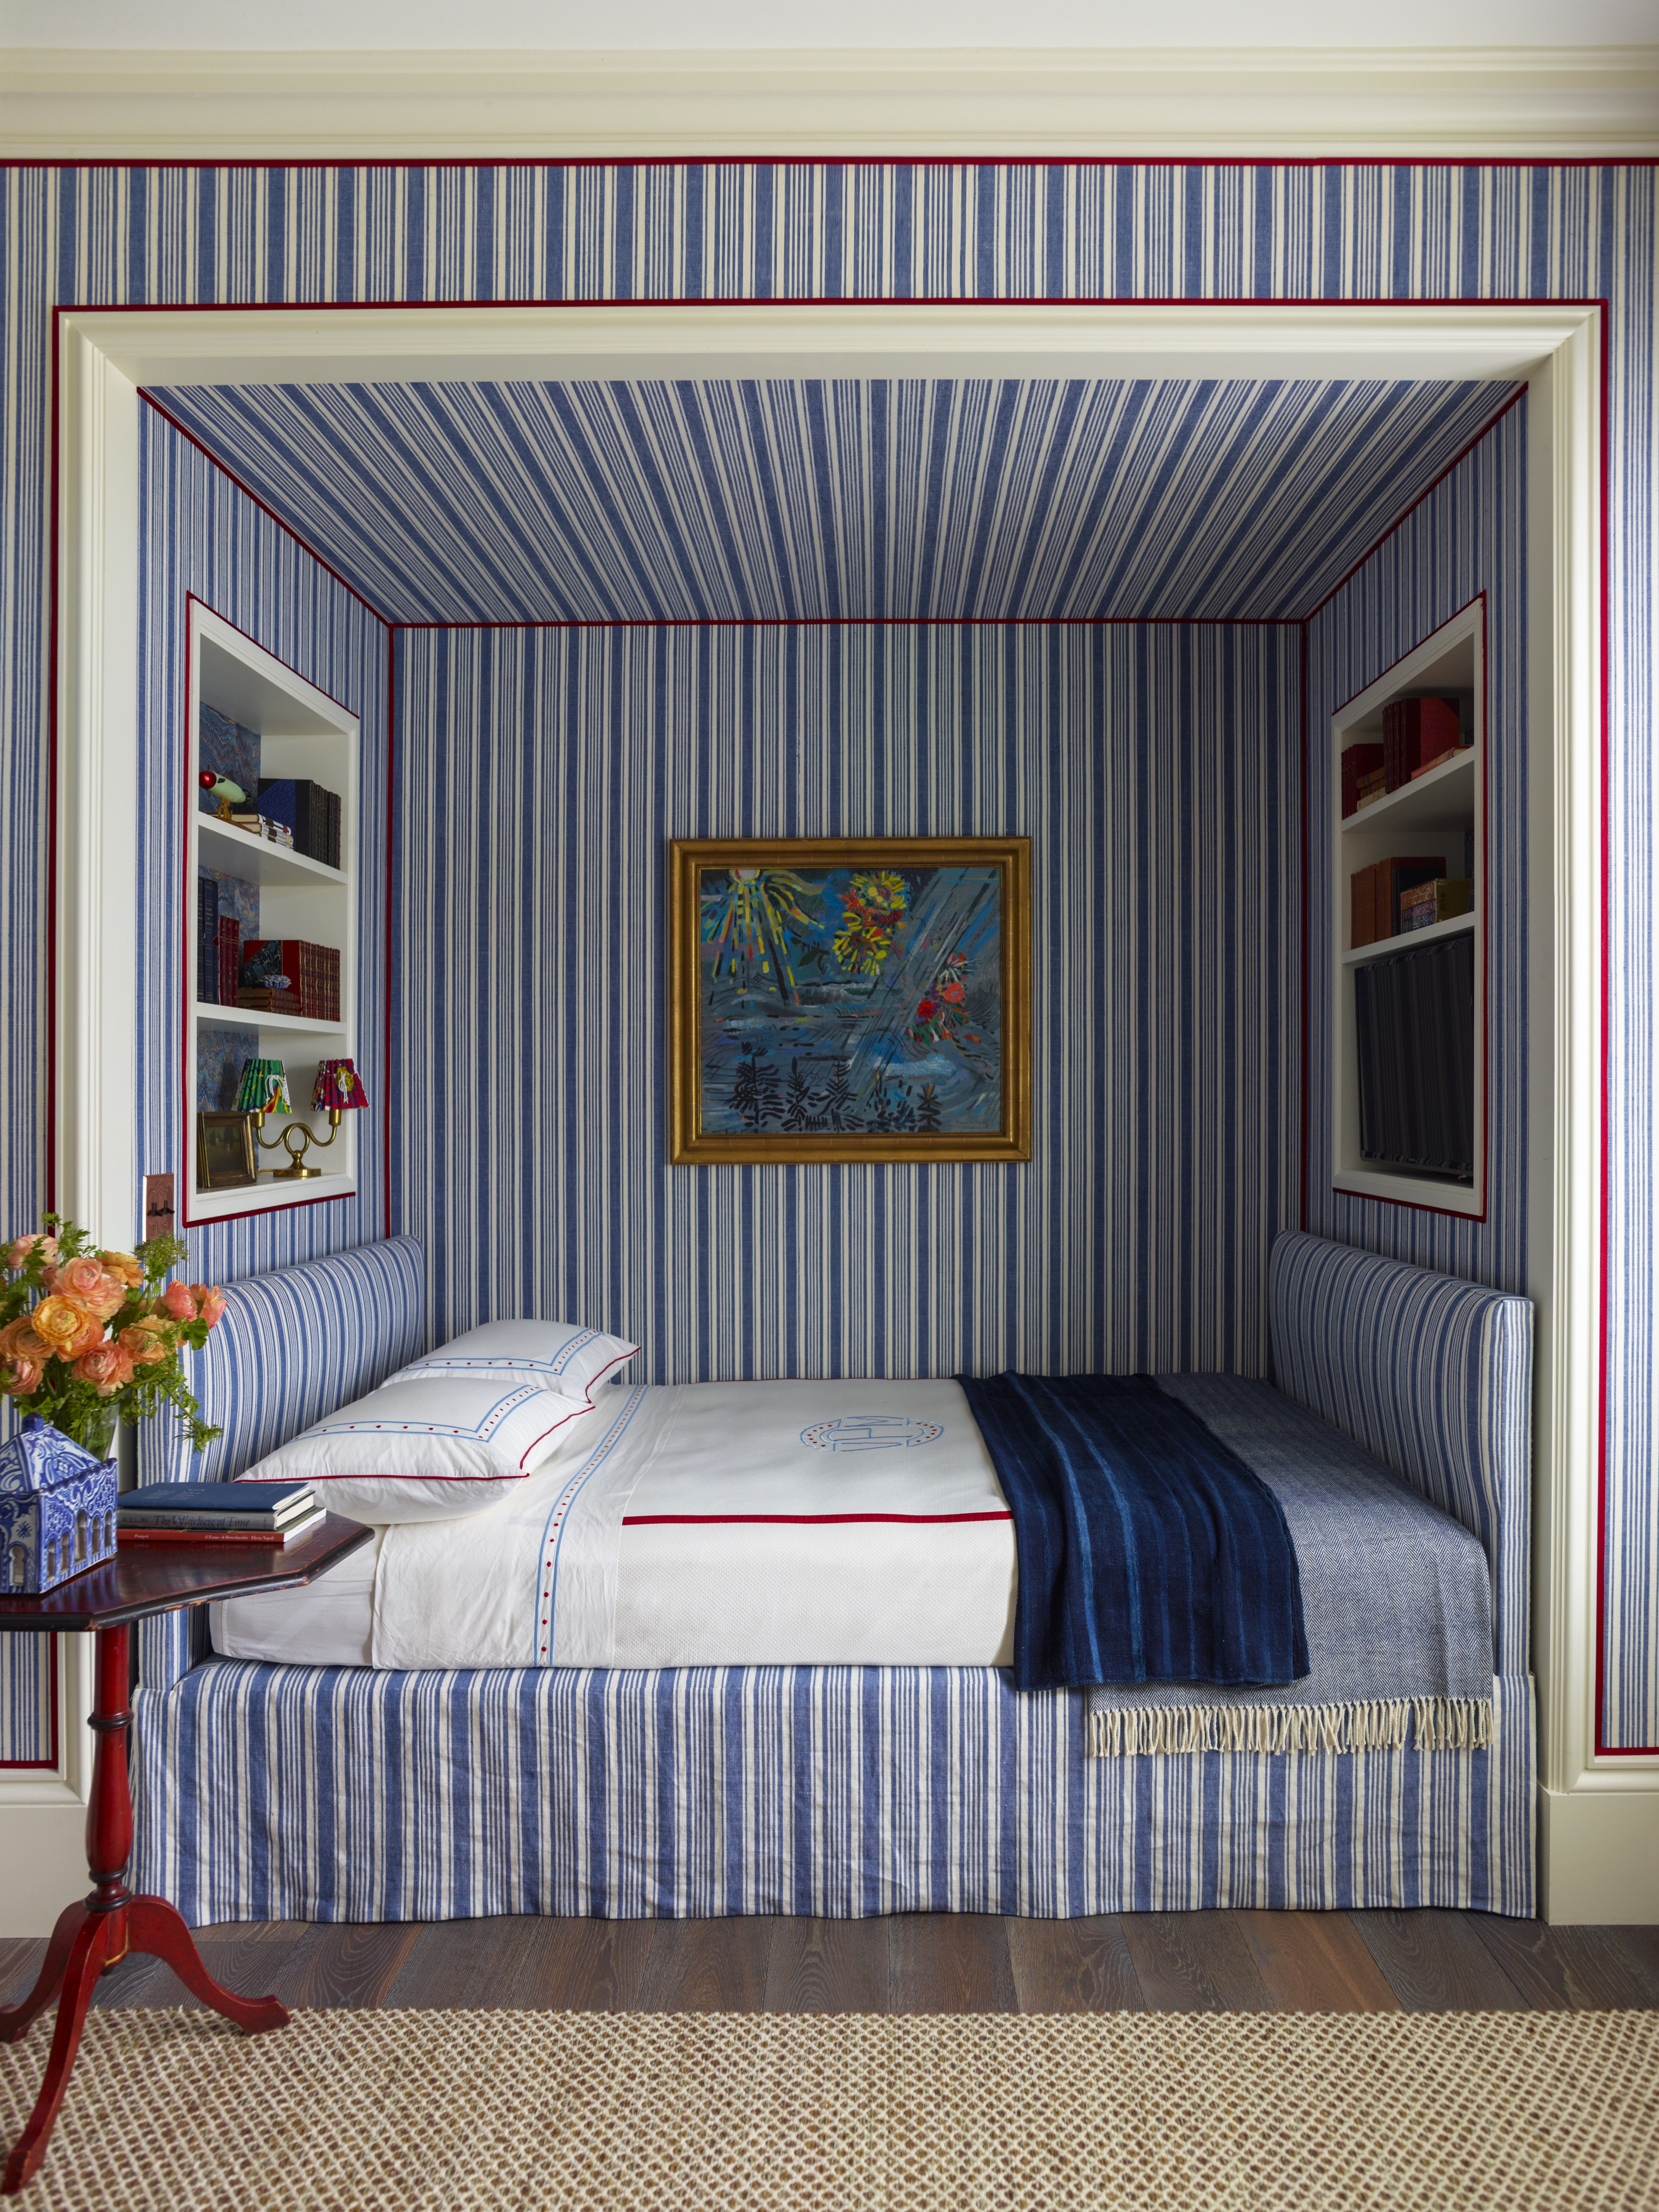 Built-in Bed With Shelving And Blue Striped Wallpaper - Alcove In Bedroom , HD Wallpaper & Backgrounds